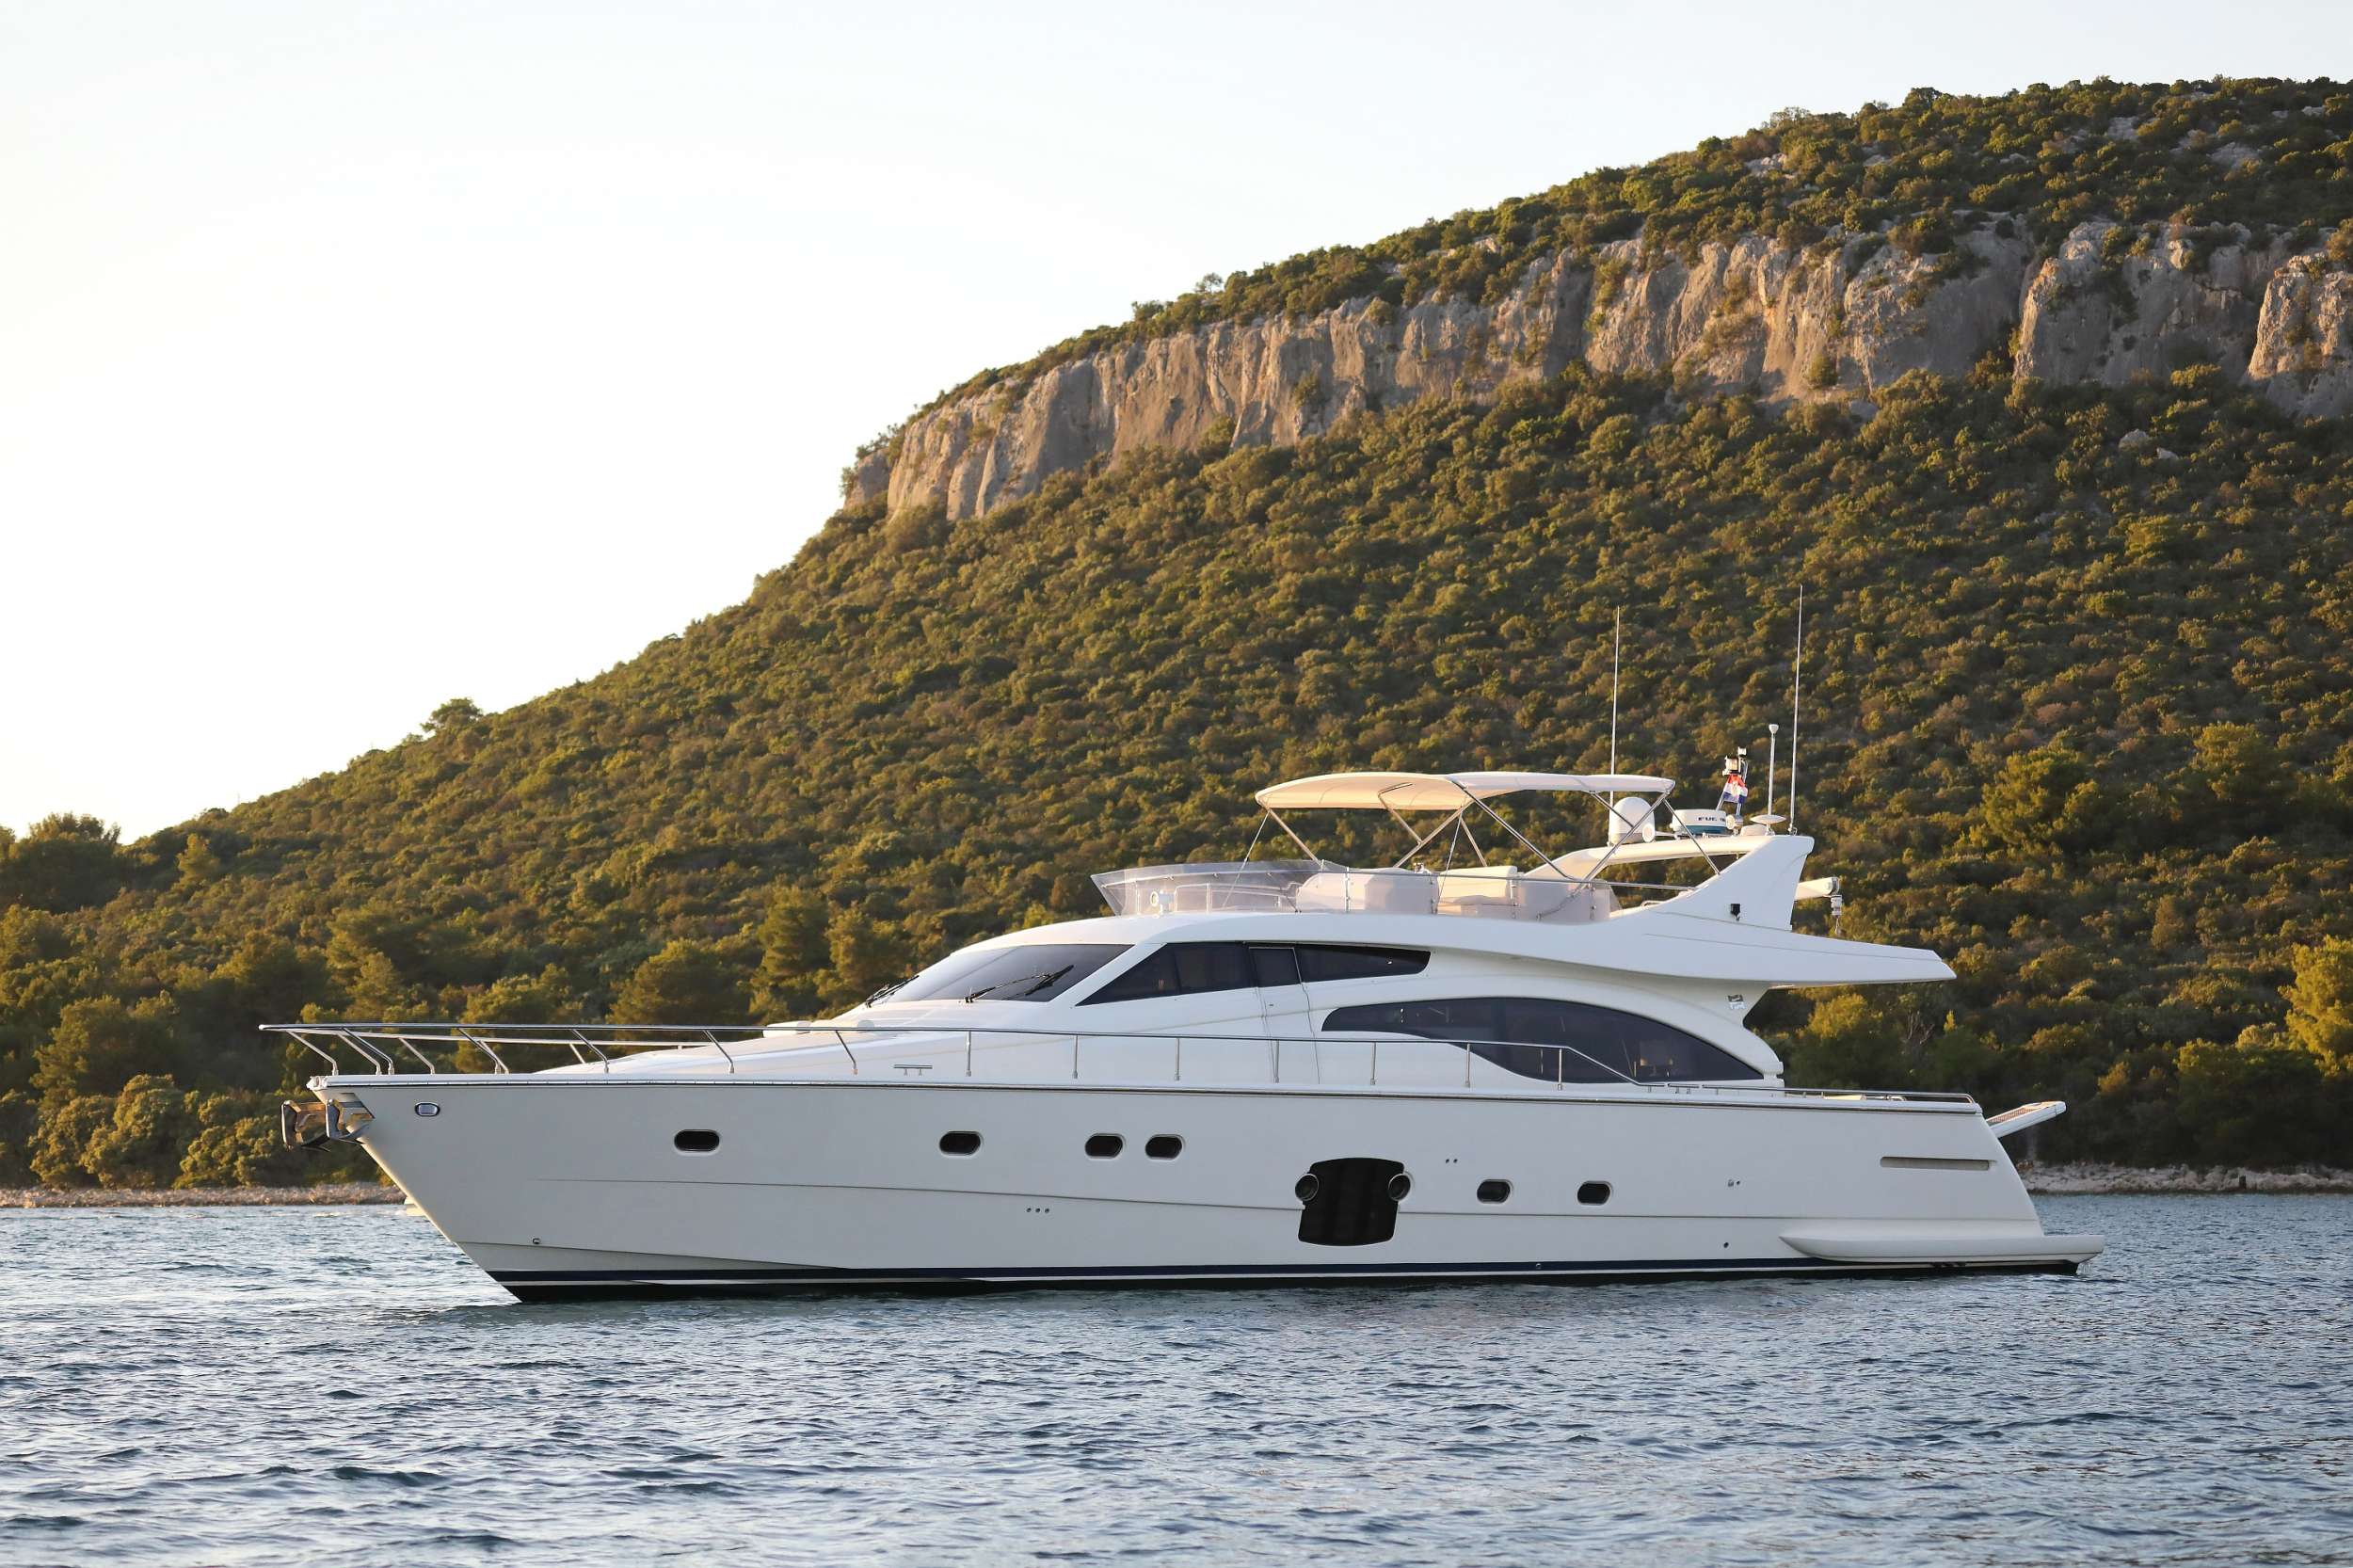 The 21m M/Y DOMINIQUE from the popular Ferretti 681 series is fast, stylish, and ideally suited to a Croatia yacht
charter. Sporting impressive stability and a top speed of 34 knots, guests can explore the stunning Adriatic coast in
luxury.
DOMINIQUE accommodates up to 8 guests in 4 cabins, consisting of a bright and airy full-beam master, a VIP, and
two twin cabins, one with L-shaped bunk beds. The yacht is built for entertaining, with three dining spaces across
the yacht: one in the beautiful split-level salon, one on the aft deck, and a third up on the flybridge, where there is
also a wet bar and sunpads. There&rsquo;s an additional sunbathing space on the bow, while the yacht&rsquo;s swim platform
makes boarding the 3.8m tender or the Seadoo Spark jetski easy.
M/Y DOMINIQUE runs with two permanent crew of captain and stewardess; a chef can also be brought on board
for an additional fee to enhance the gourmet experience on your Adriatic yacht charter.